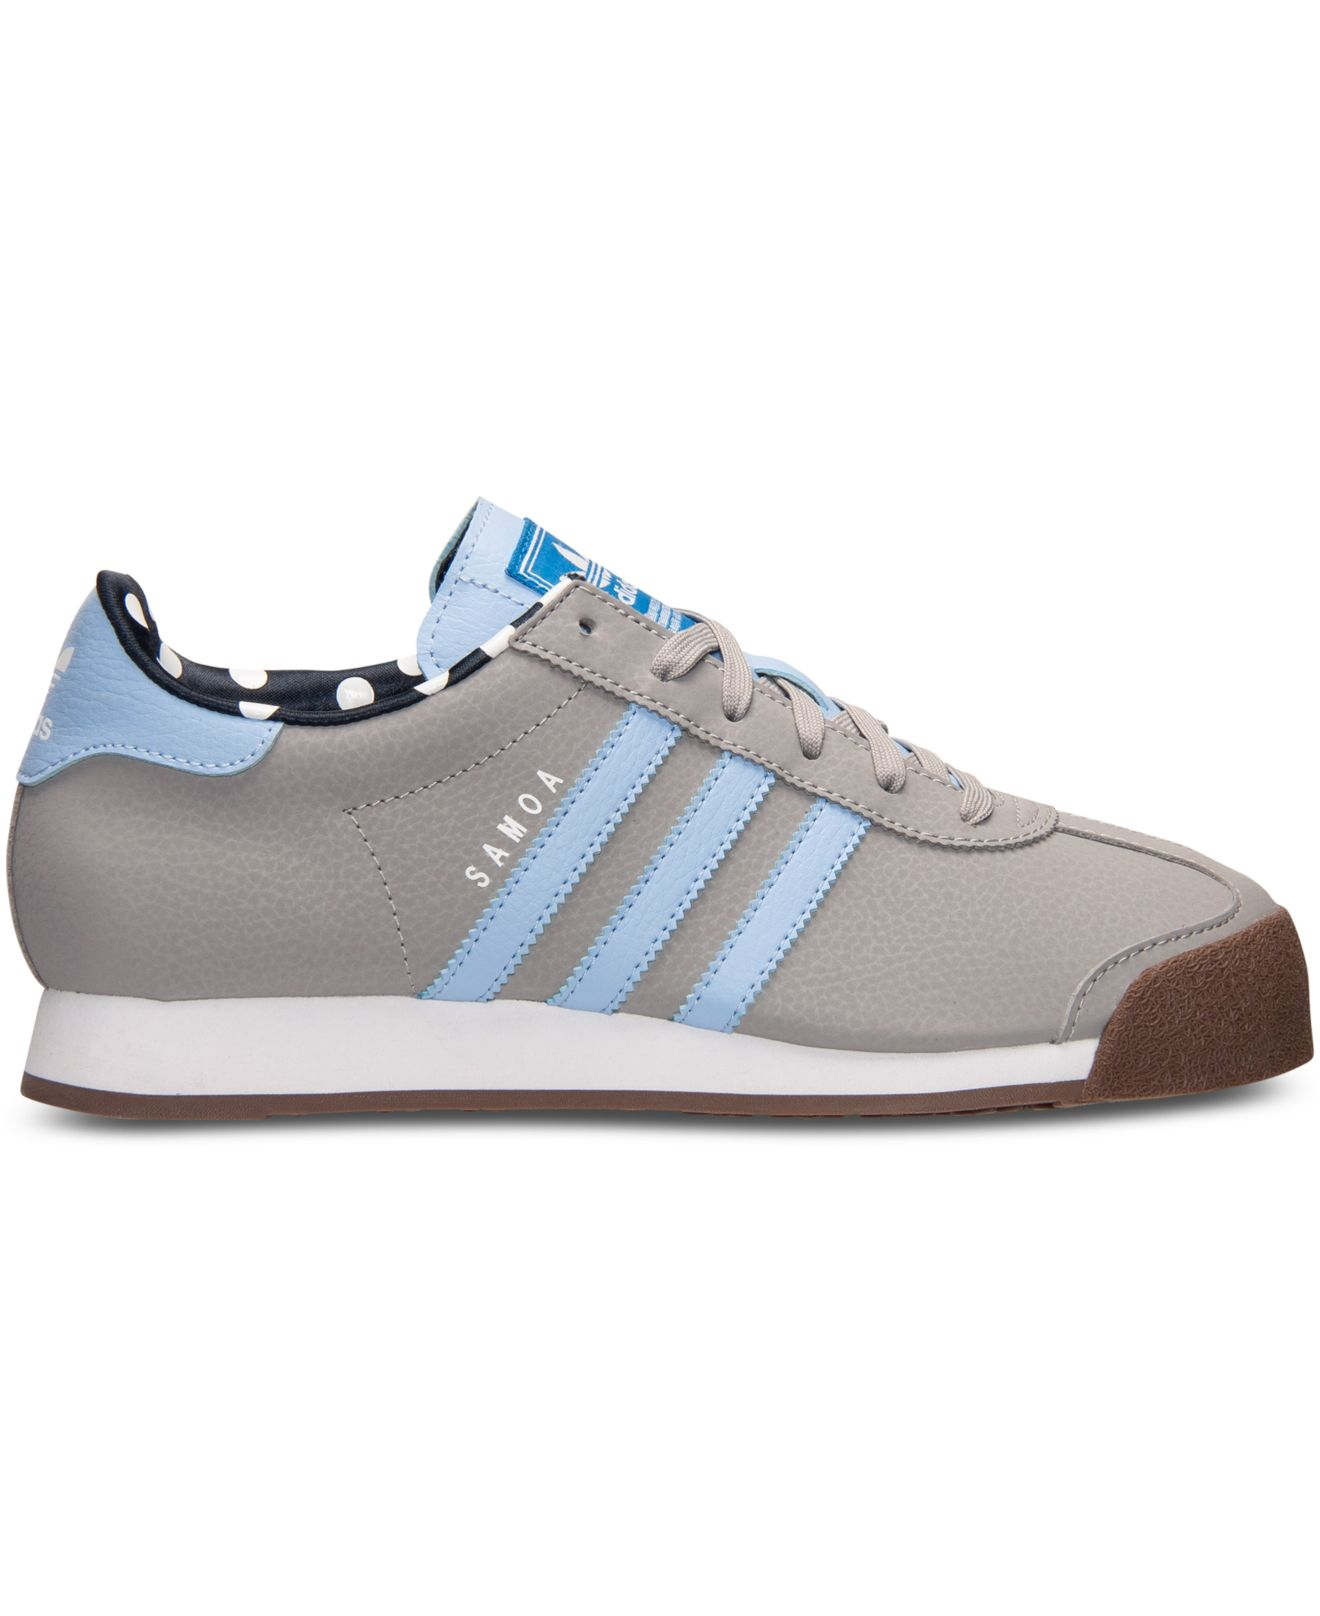 Lyst - Adidas Women's Samoa Casual Sneakers From Finish Line in Gray